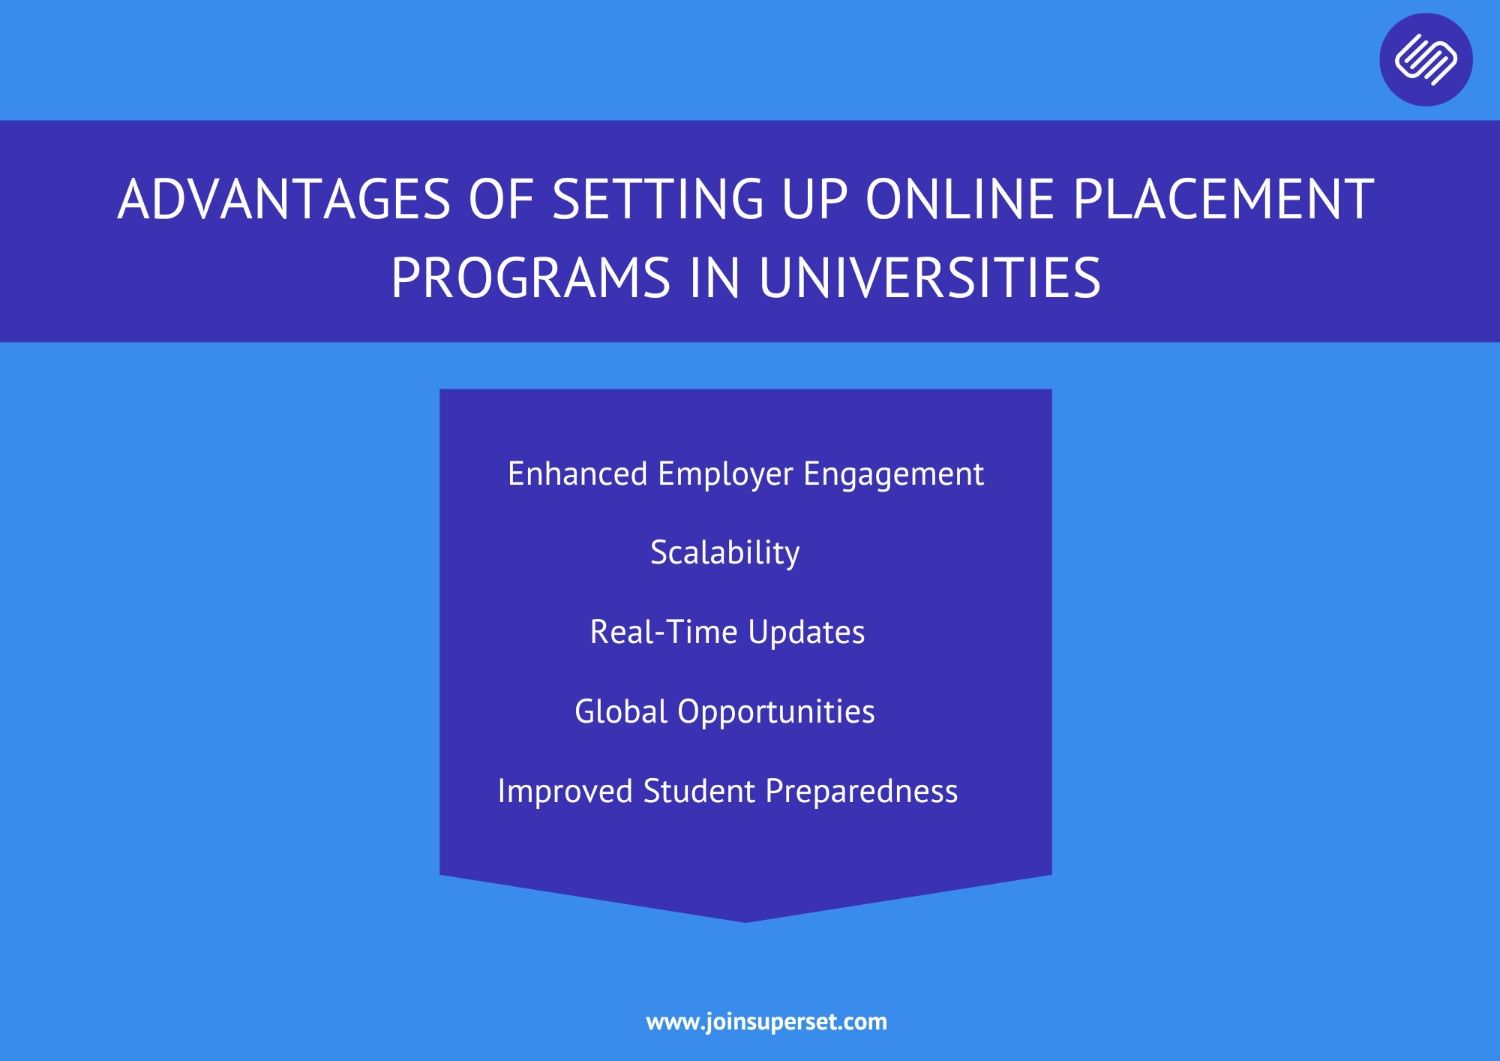 Advantages of Setting Up Online Placement Programs in Universities